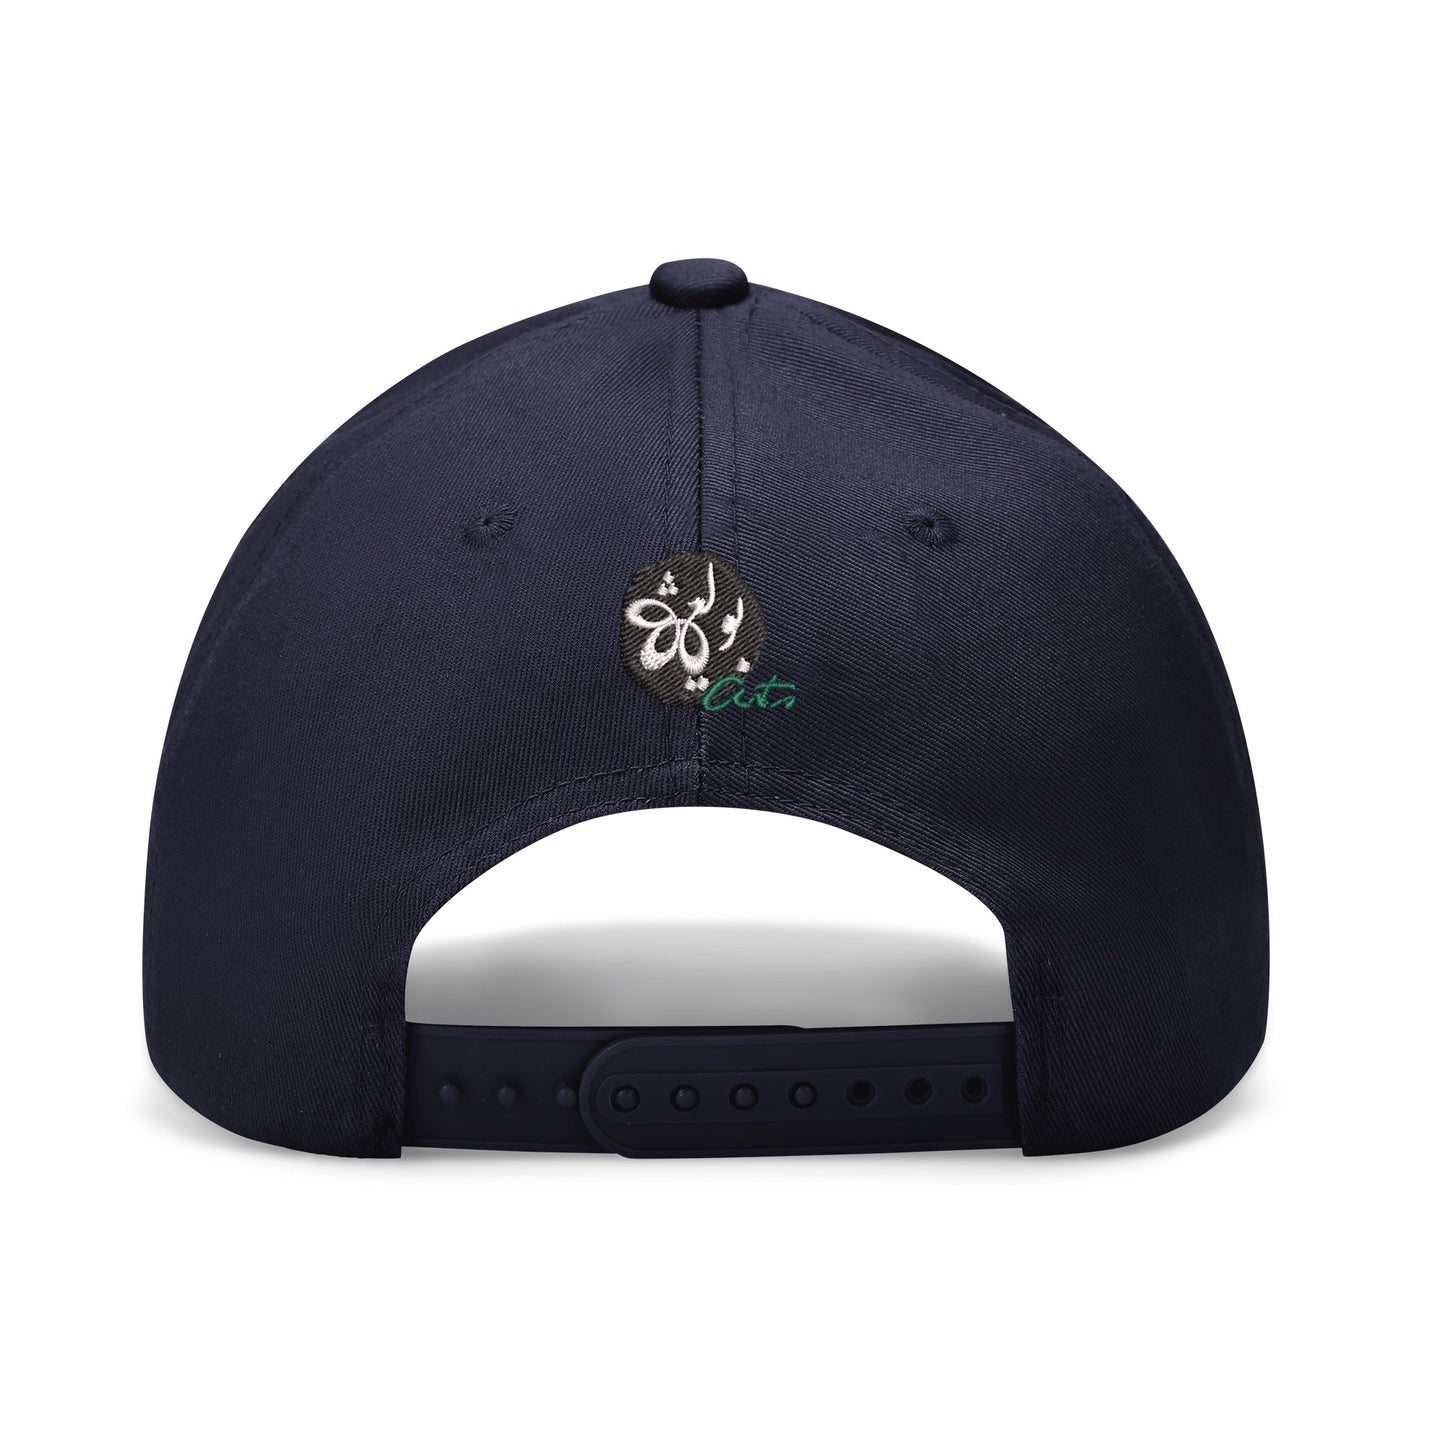 Live Up Arabic Calligraphy Embroidered Baseball Cap